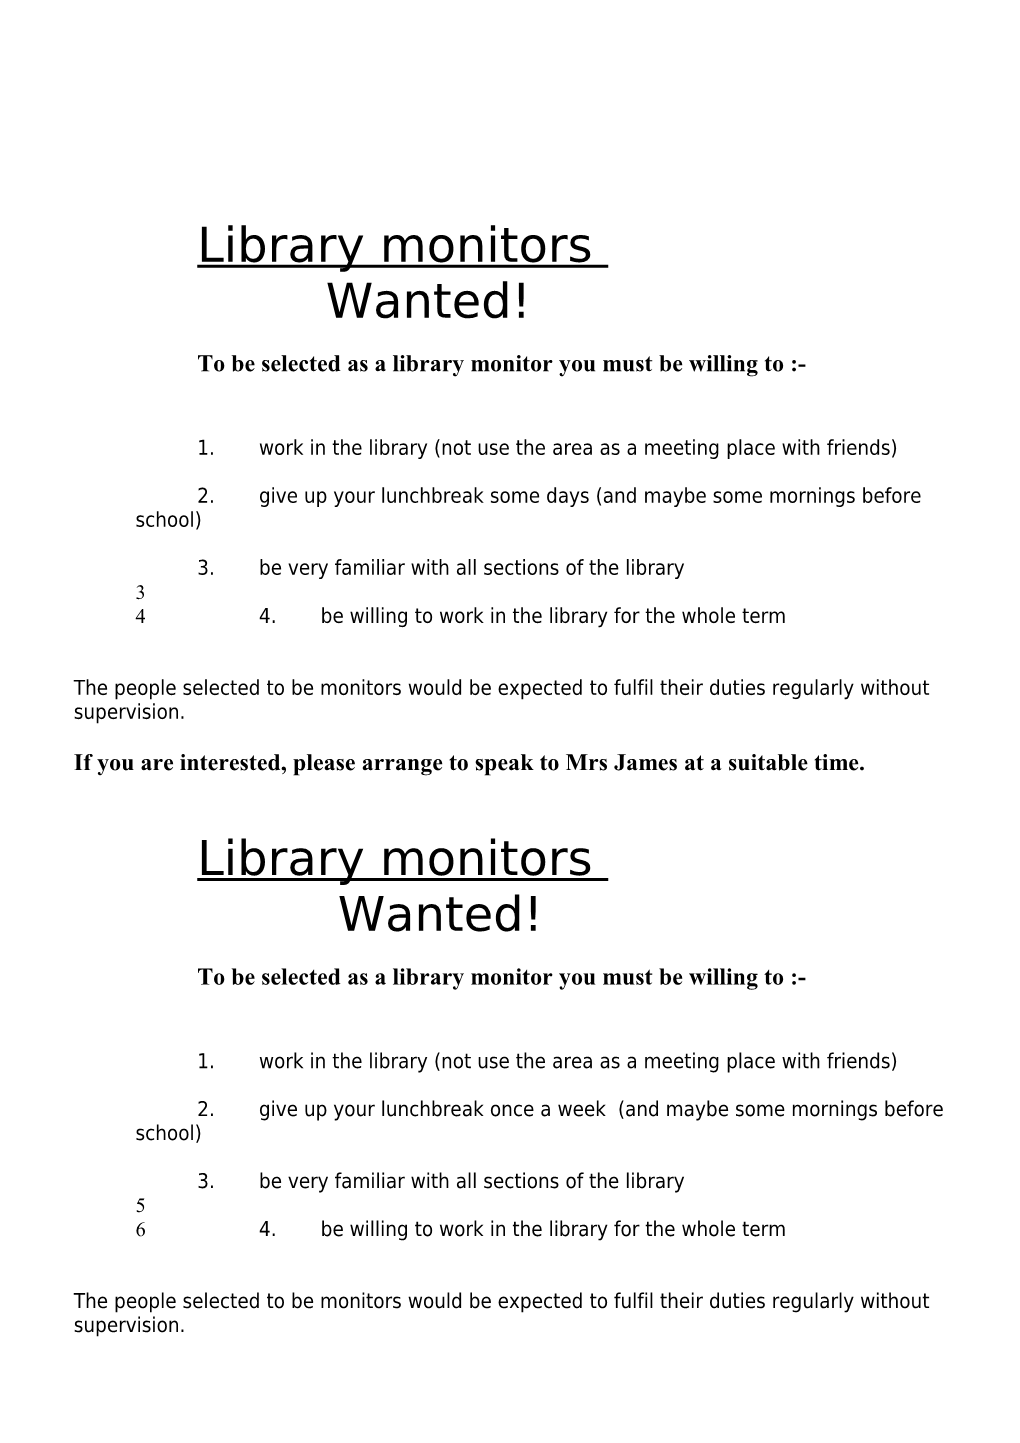 To Be Selected As a Library Monitor You Must Be Willing to